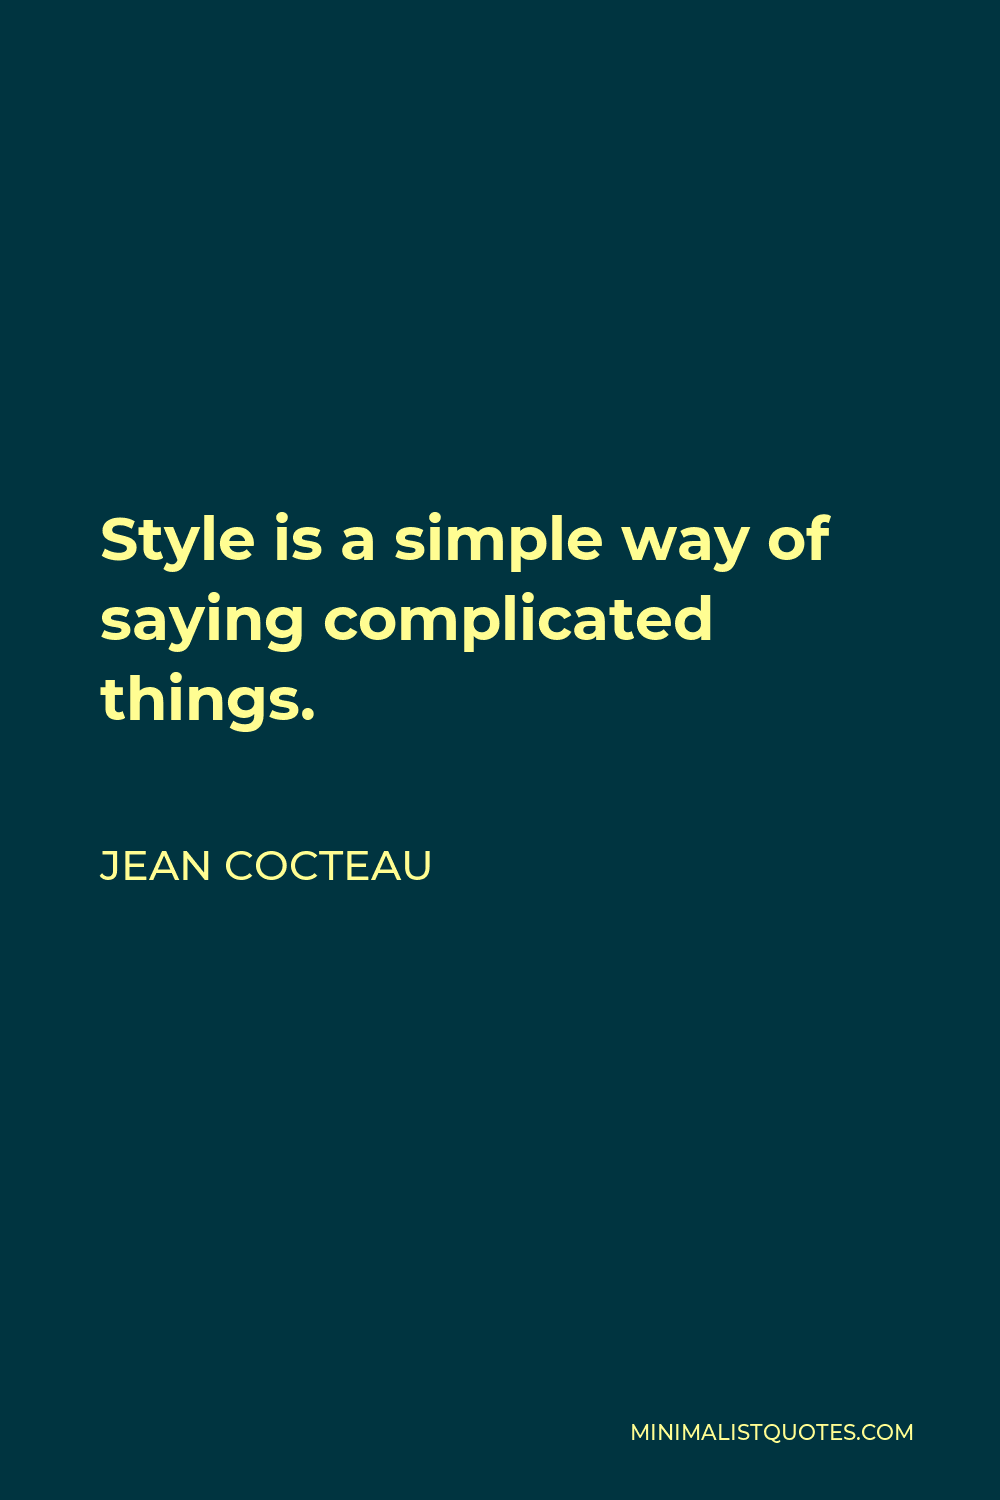 Jean Cocteau Quote - Style is a simple way of saying complicated things.